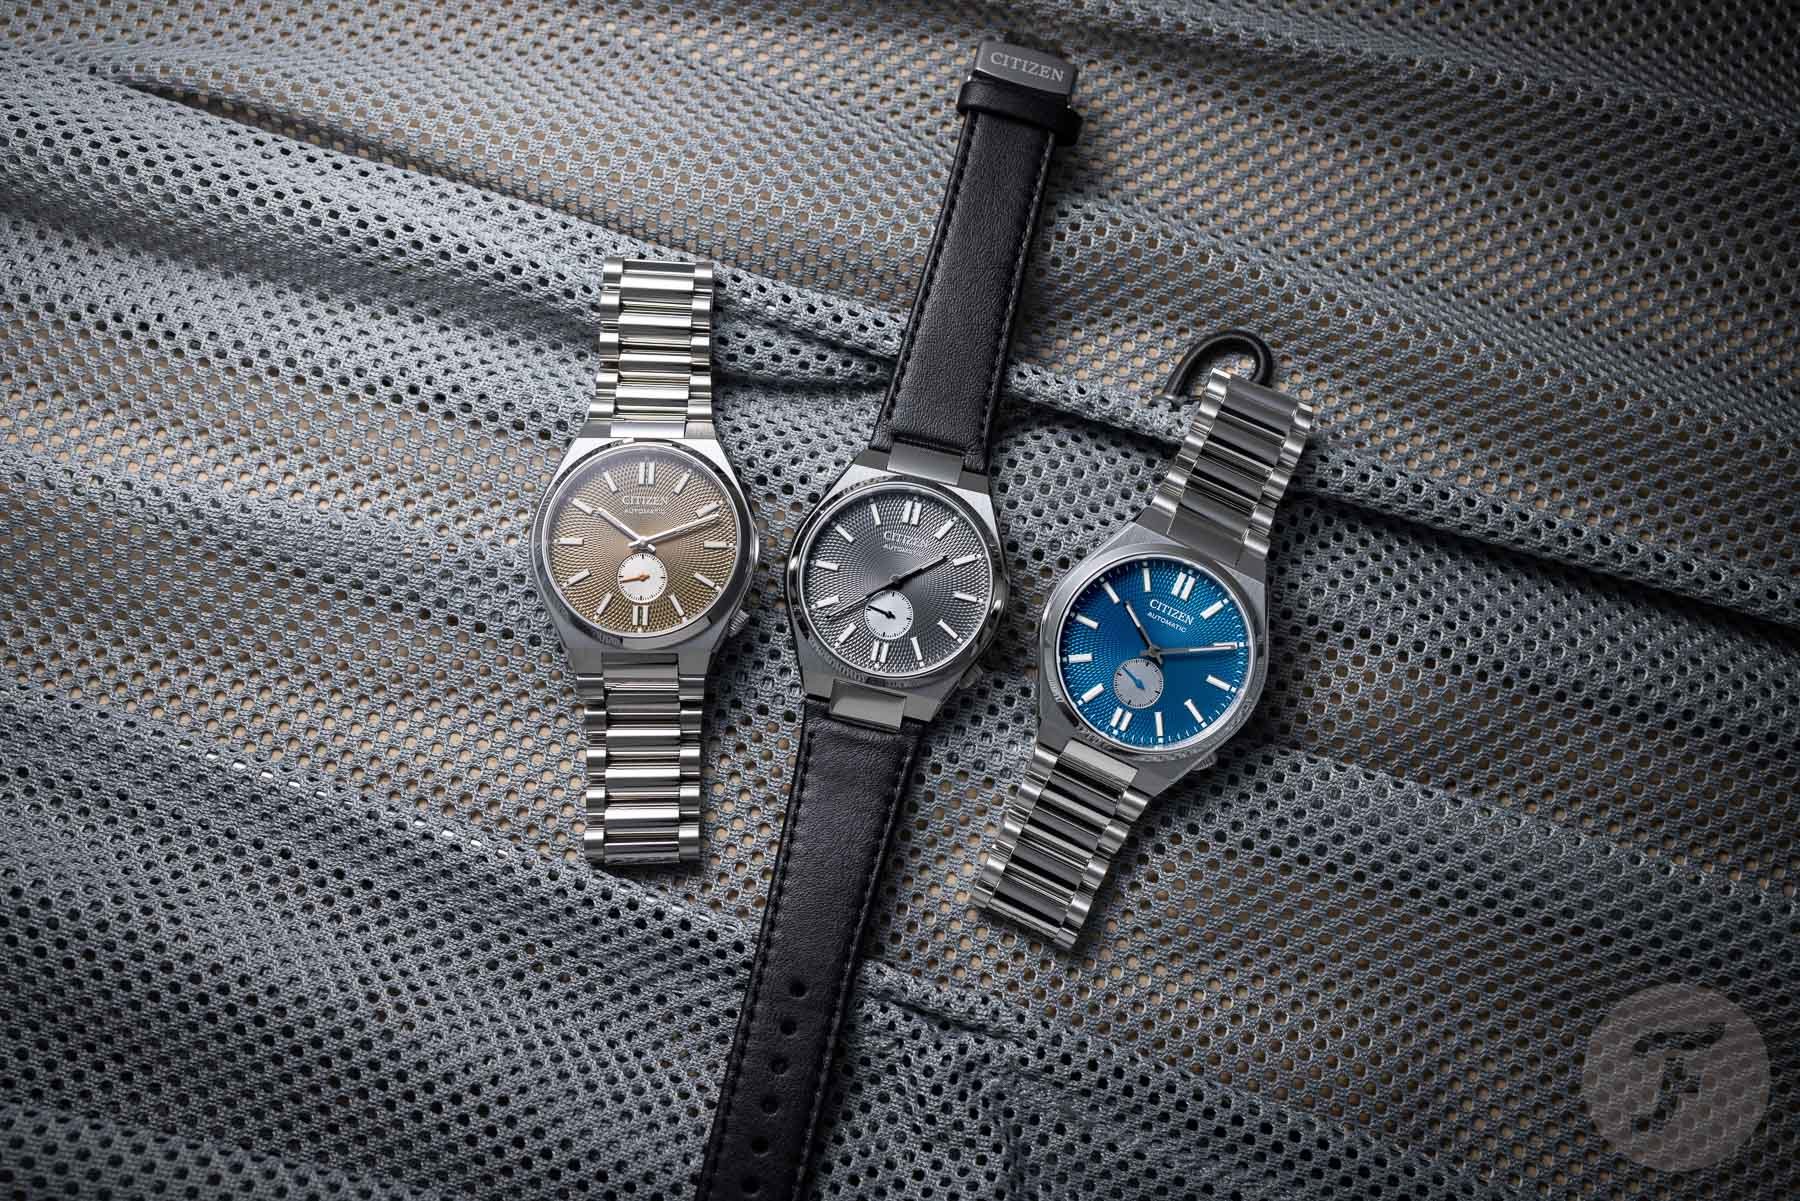 Enter to Win an EDC Giveaway with Topo Designs, Cantonment, Quaker Marine Supply, One Eleven, and the Windup Watch Shop!